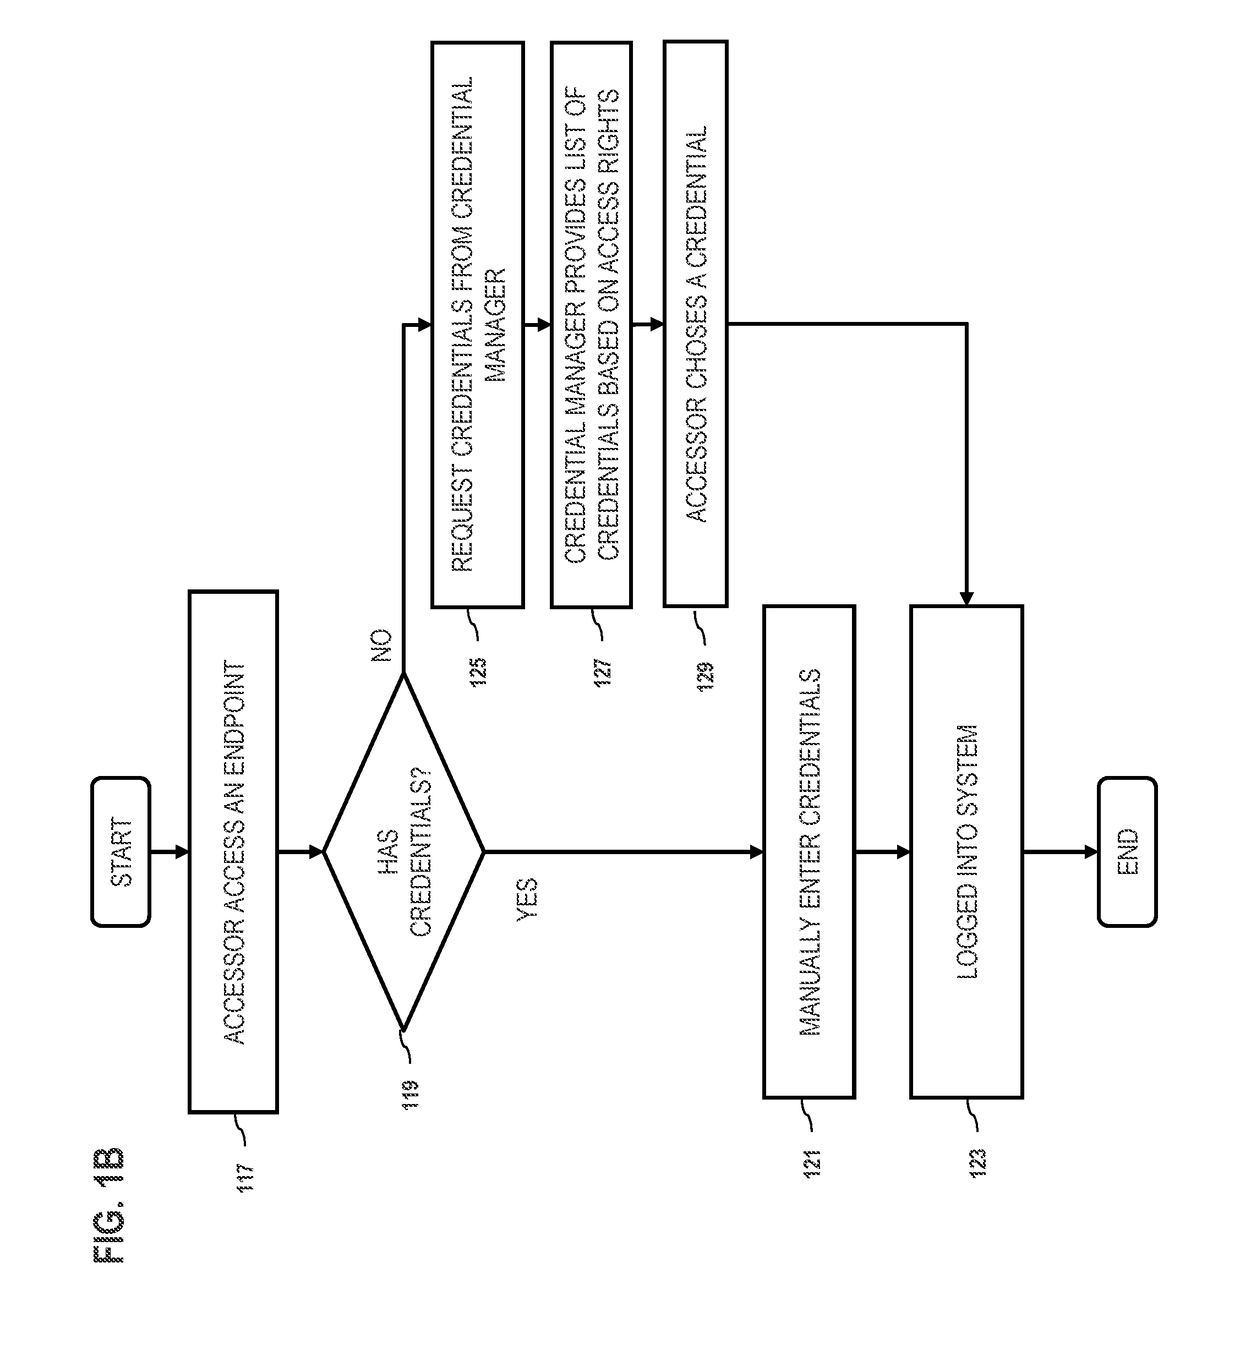 Systems, methods, and apparatuses for credential handling